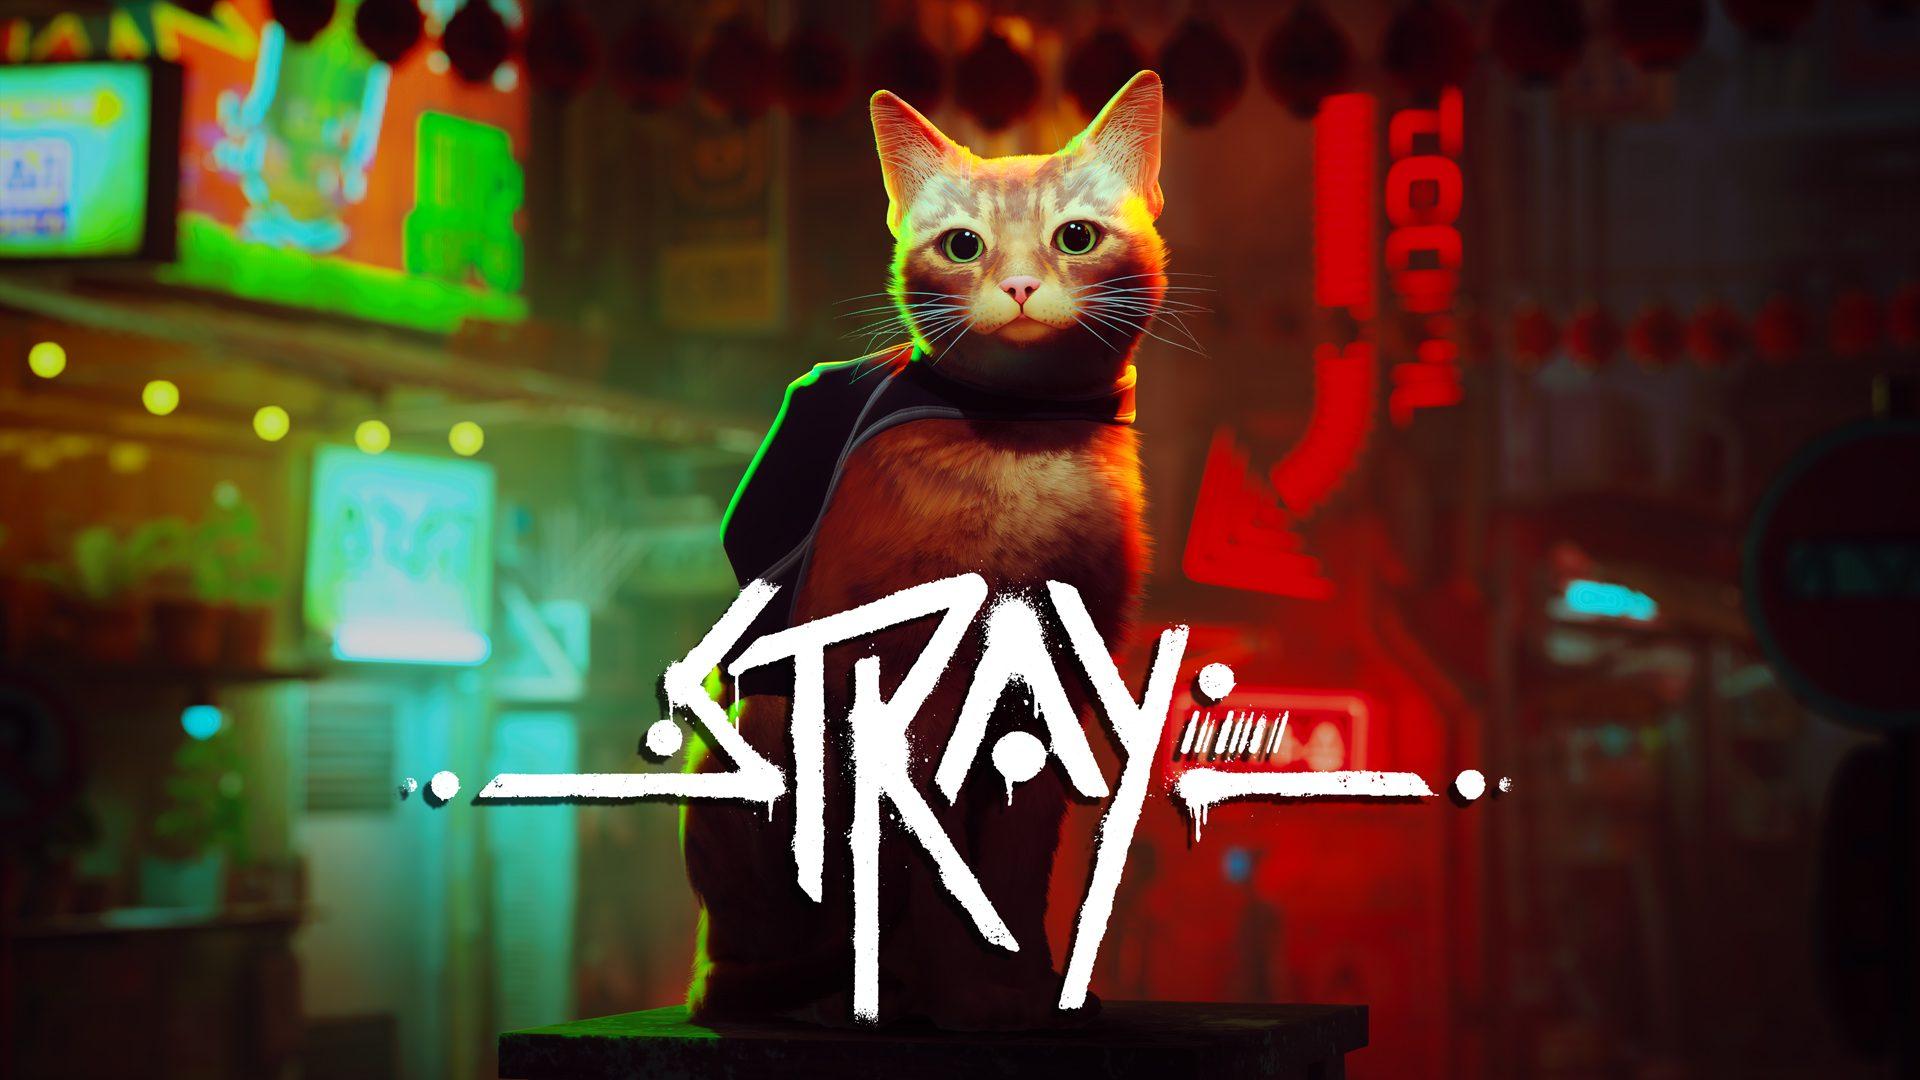 Stray game wallpaper iphone